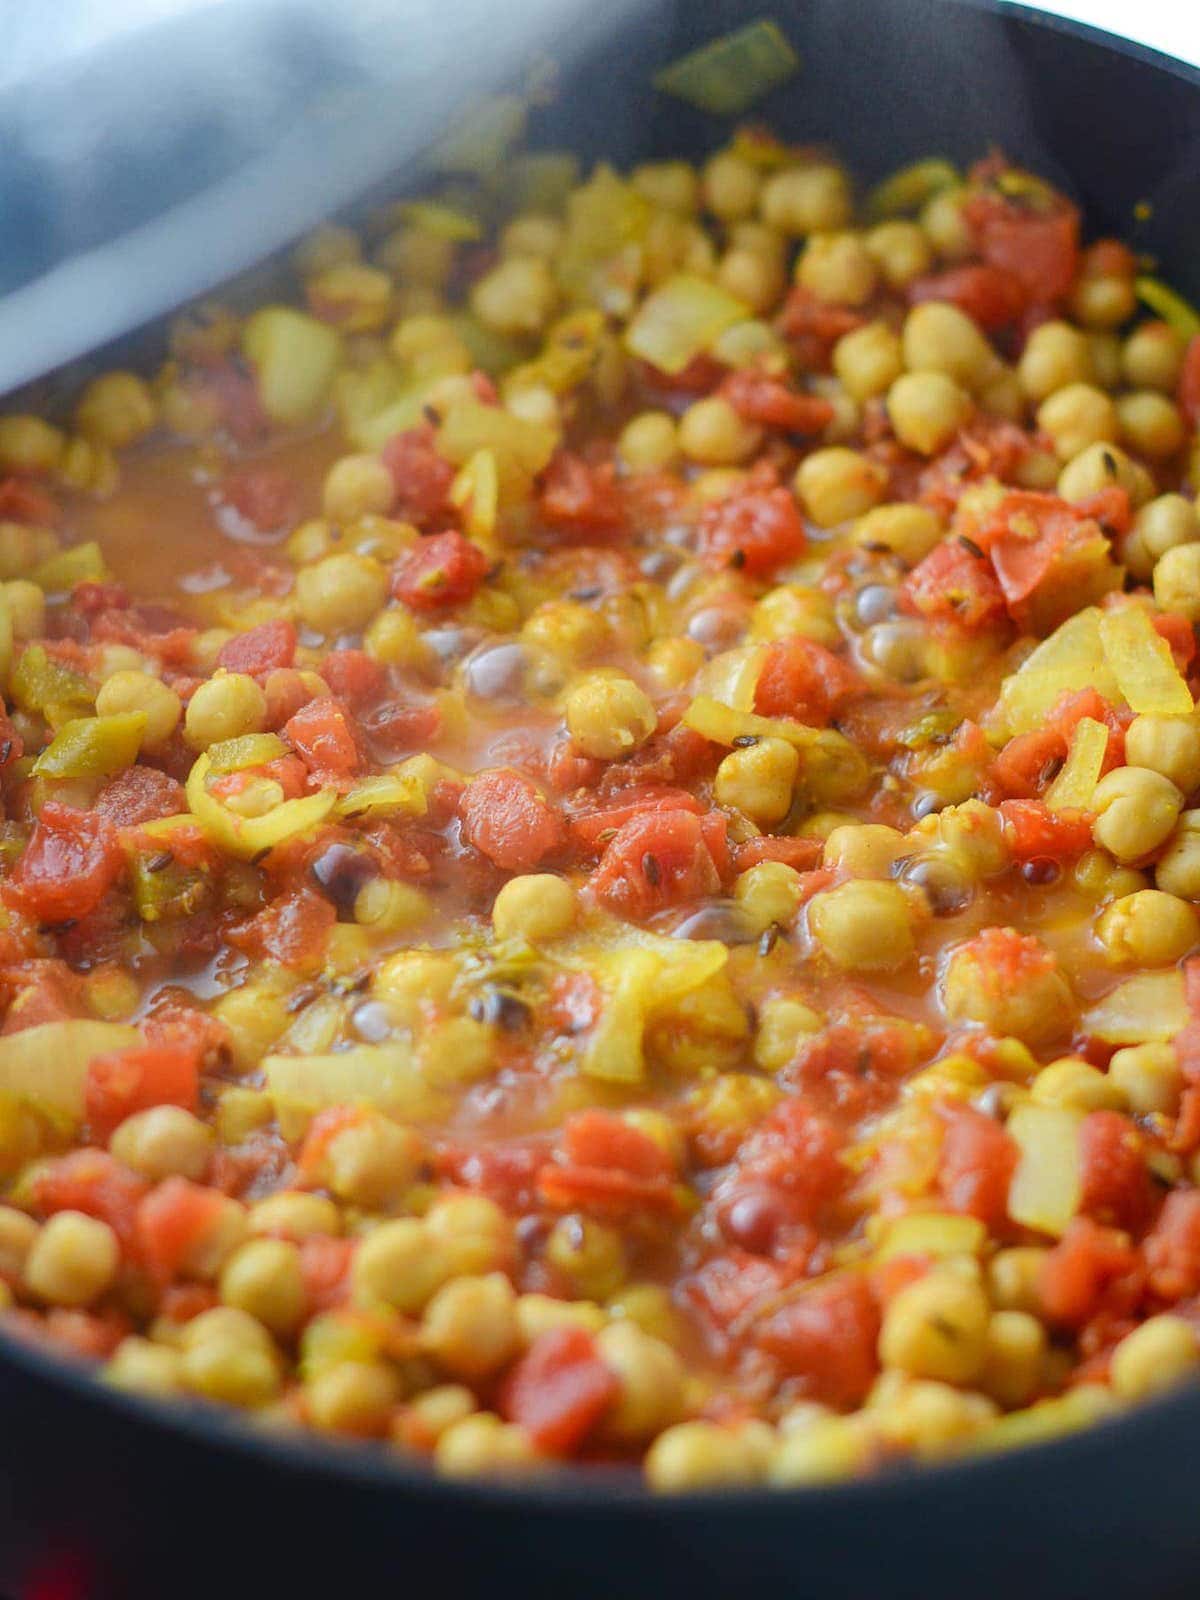 This is a photo of the cooking chana masala.